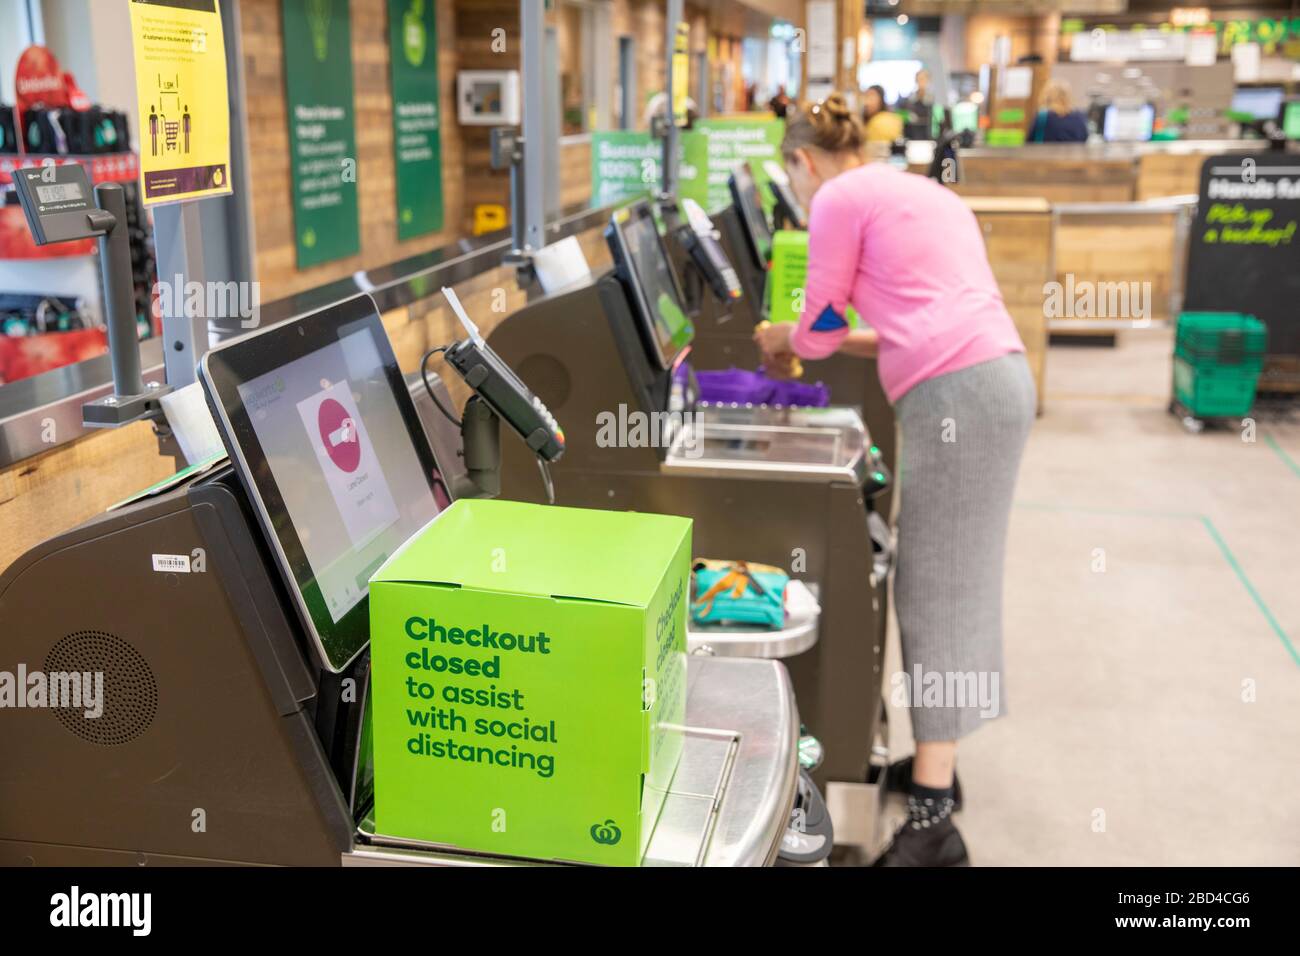 Self checkout closed in an Australian woolworths supermarket to allow customers to maintain social distancing as they pay for their groceries,Sydney, Stock Photo